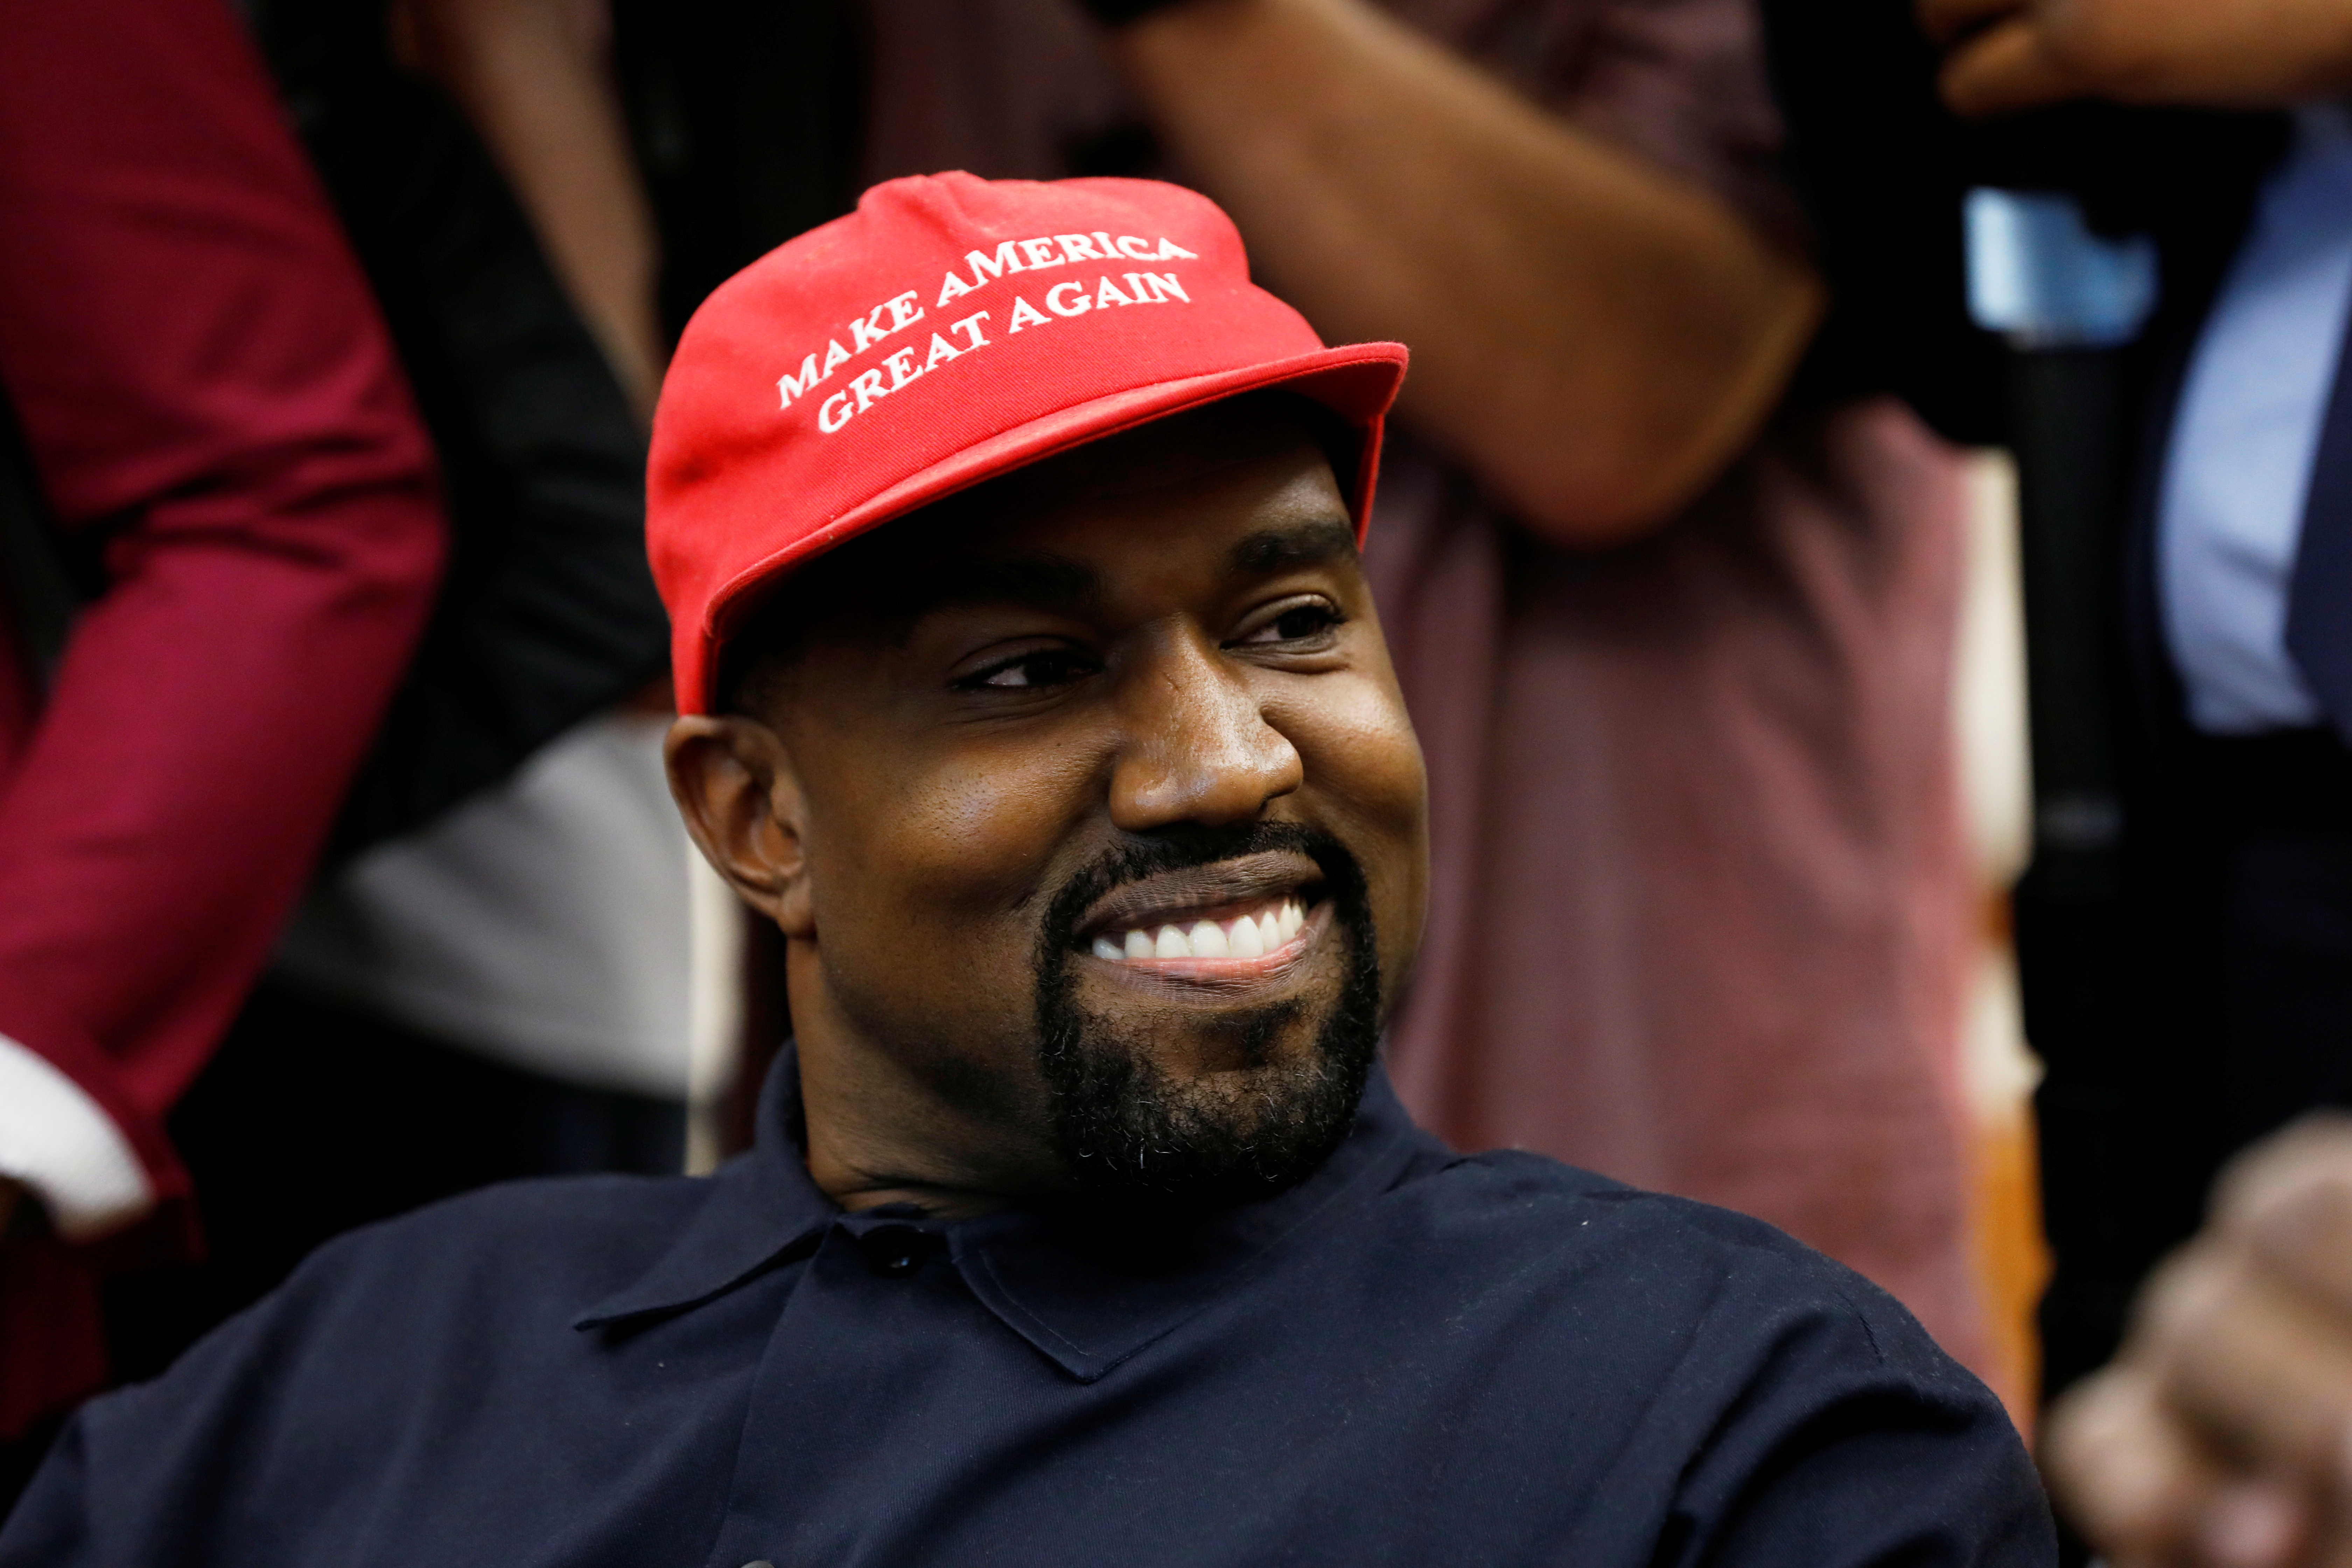 Rapper Kanye West attends a meeting with U.S. President Trump at the White House in Washington